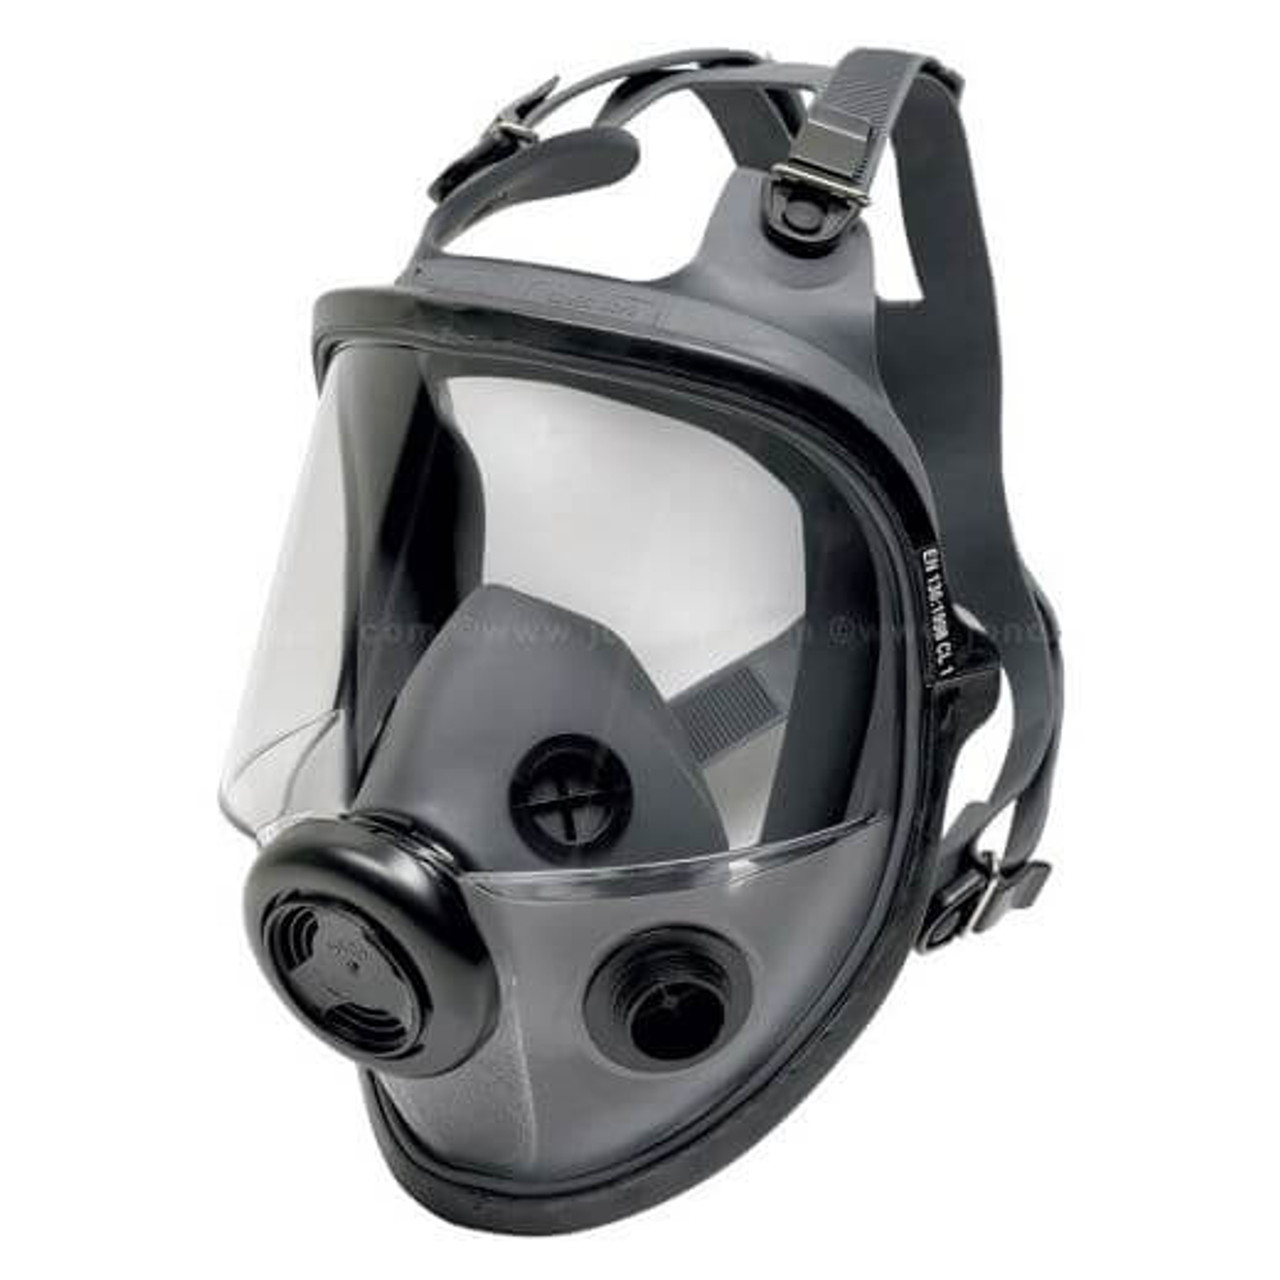 North 5400 Full Respirator - NOISH Approved - Full Face Respirators